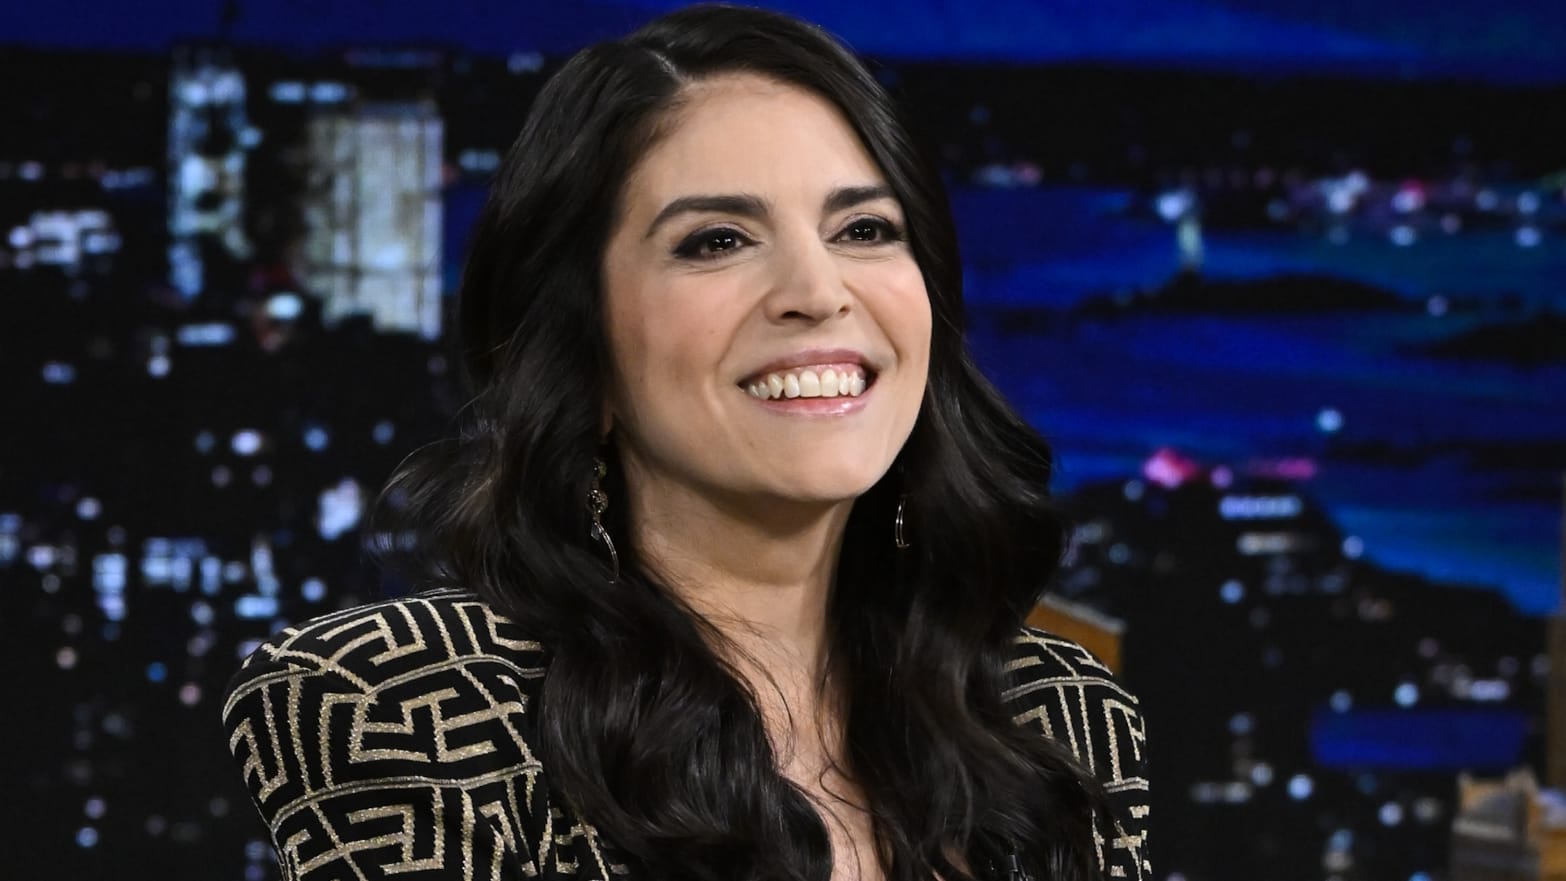 Cecily Strong Chooses Not To Participate In Controversial ‘SNL’ Skit On ‘Genocide Of Jews’ Testimony